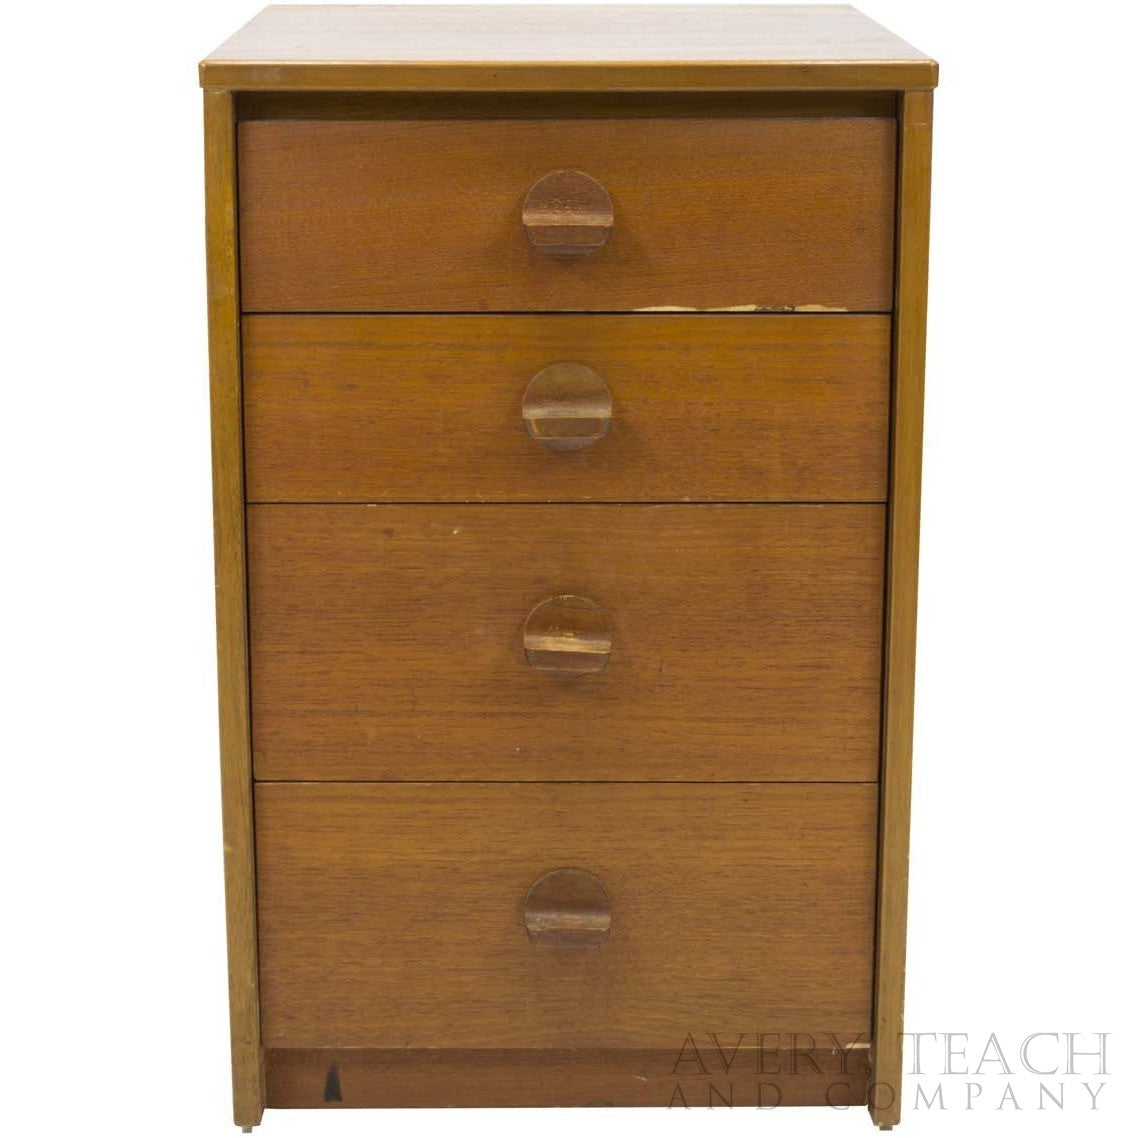 Mid-Century Stag Furniture Bedside Drawers - Avery, Teach and Co.